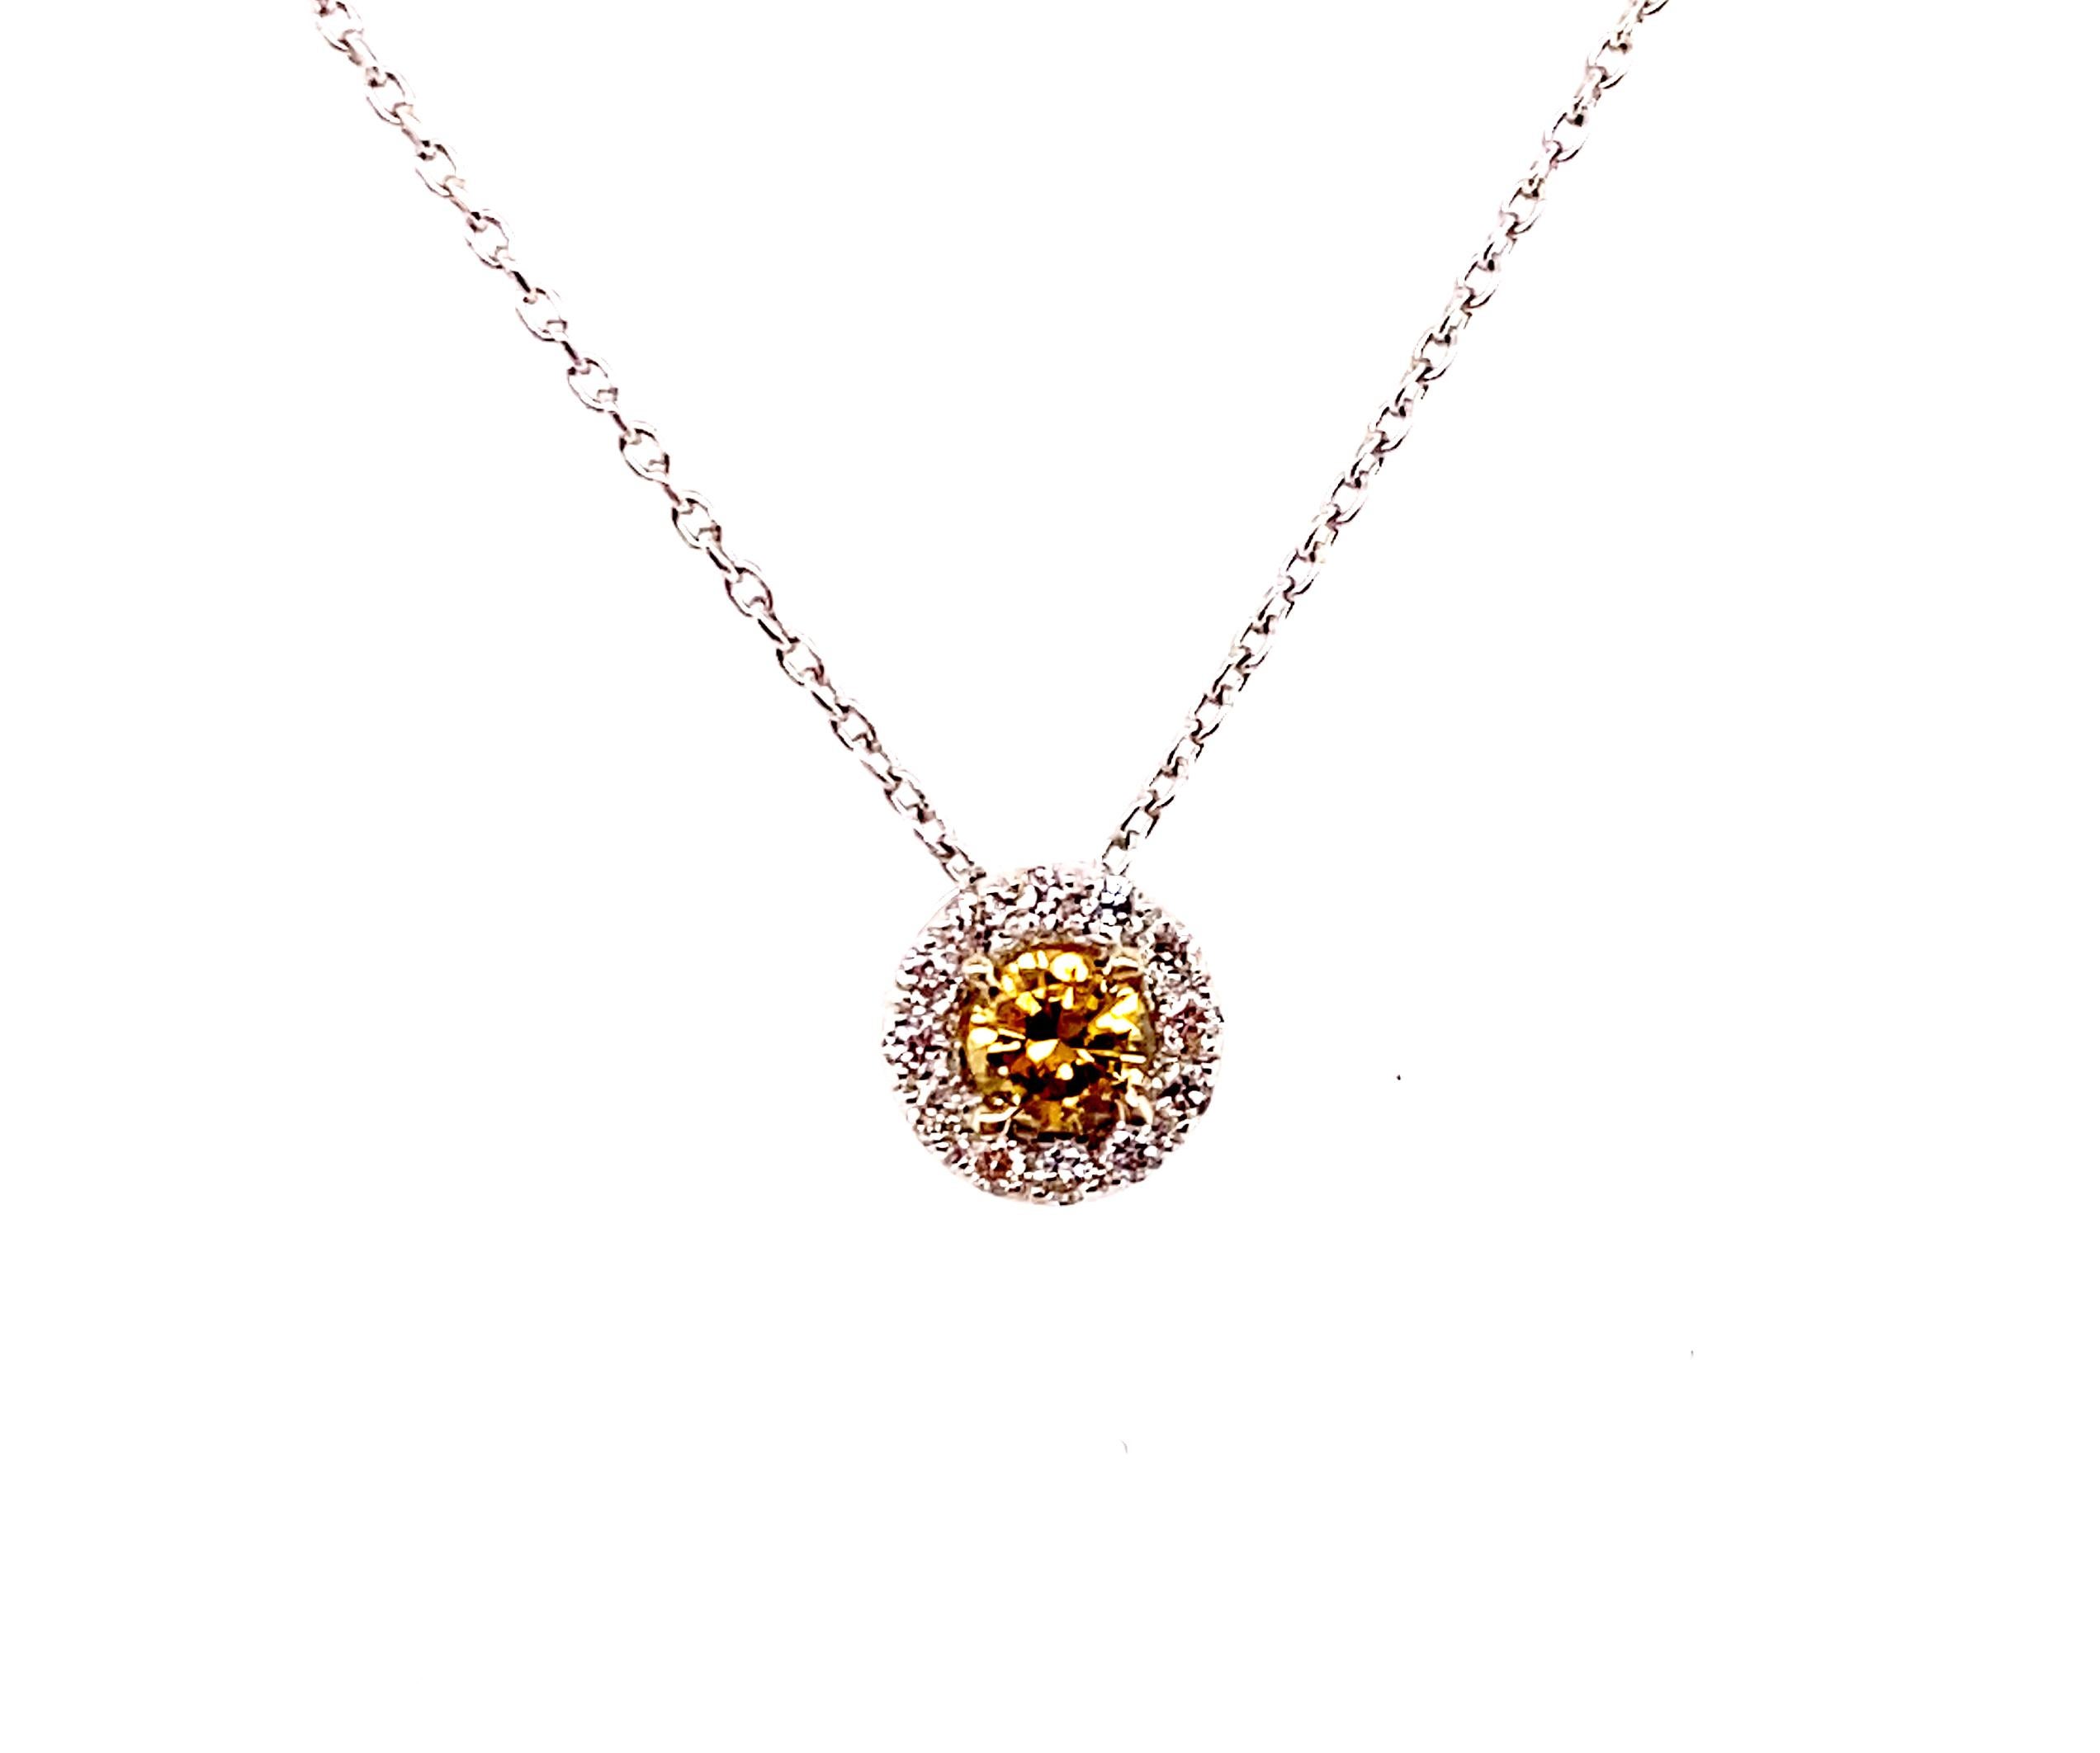 GIA Fancy Yellow Diamond Pendant Diamond Halo Necklace .25ct Round Brilliant Brand New 14K


Featuring a Glamorous Genuine GIA Certified .14ct Fancy Yellow Diamond 

Halo Pendant Flaunts One Mesmerizing Round-Cut Prong-Set Fancy Yellow